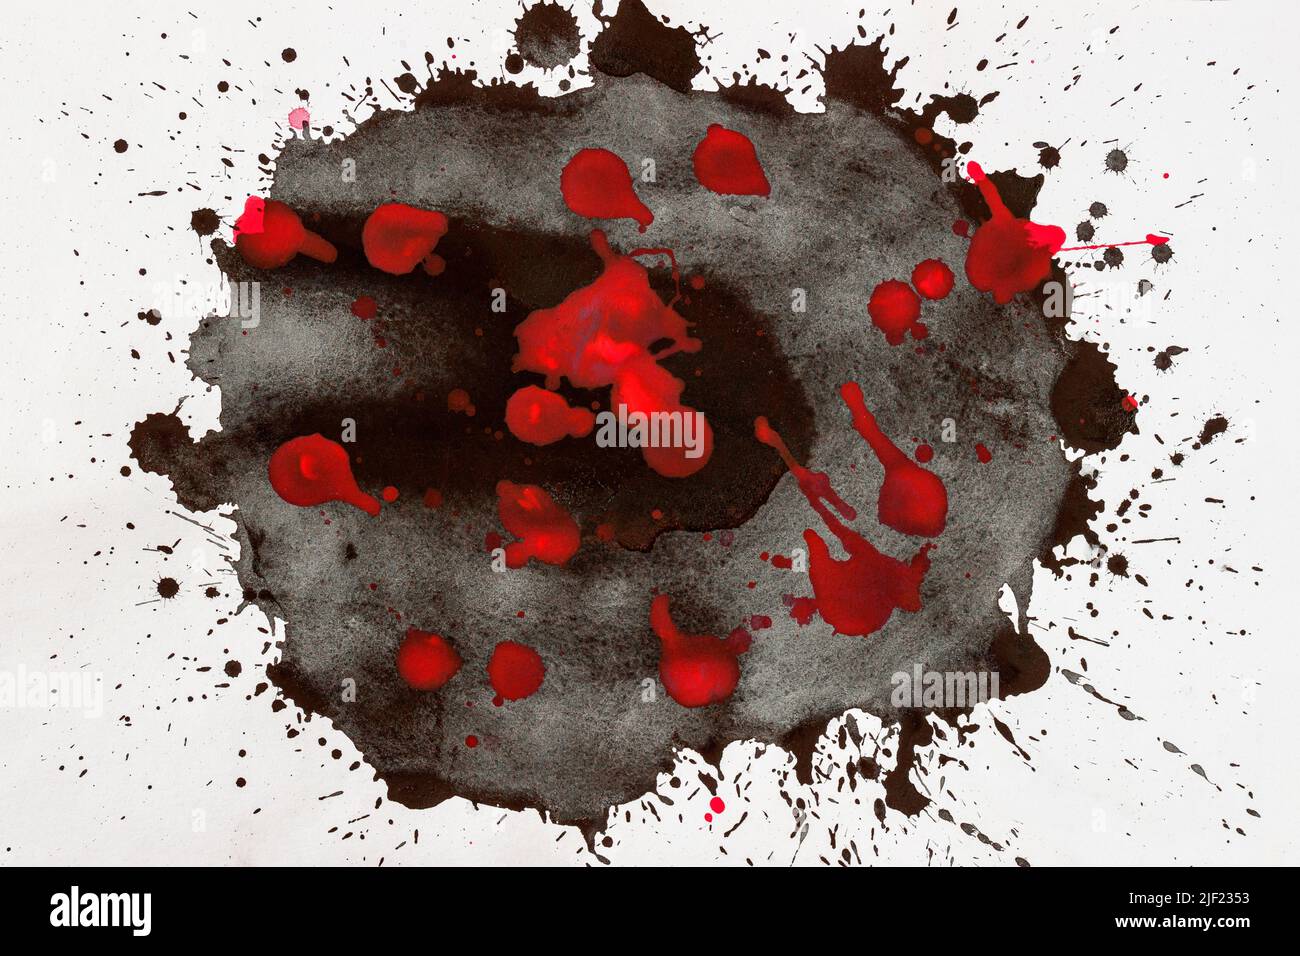 Old paper with messy blood stains Stock Illustration by ©exshutter